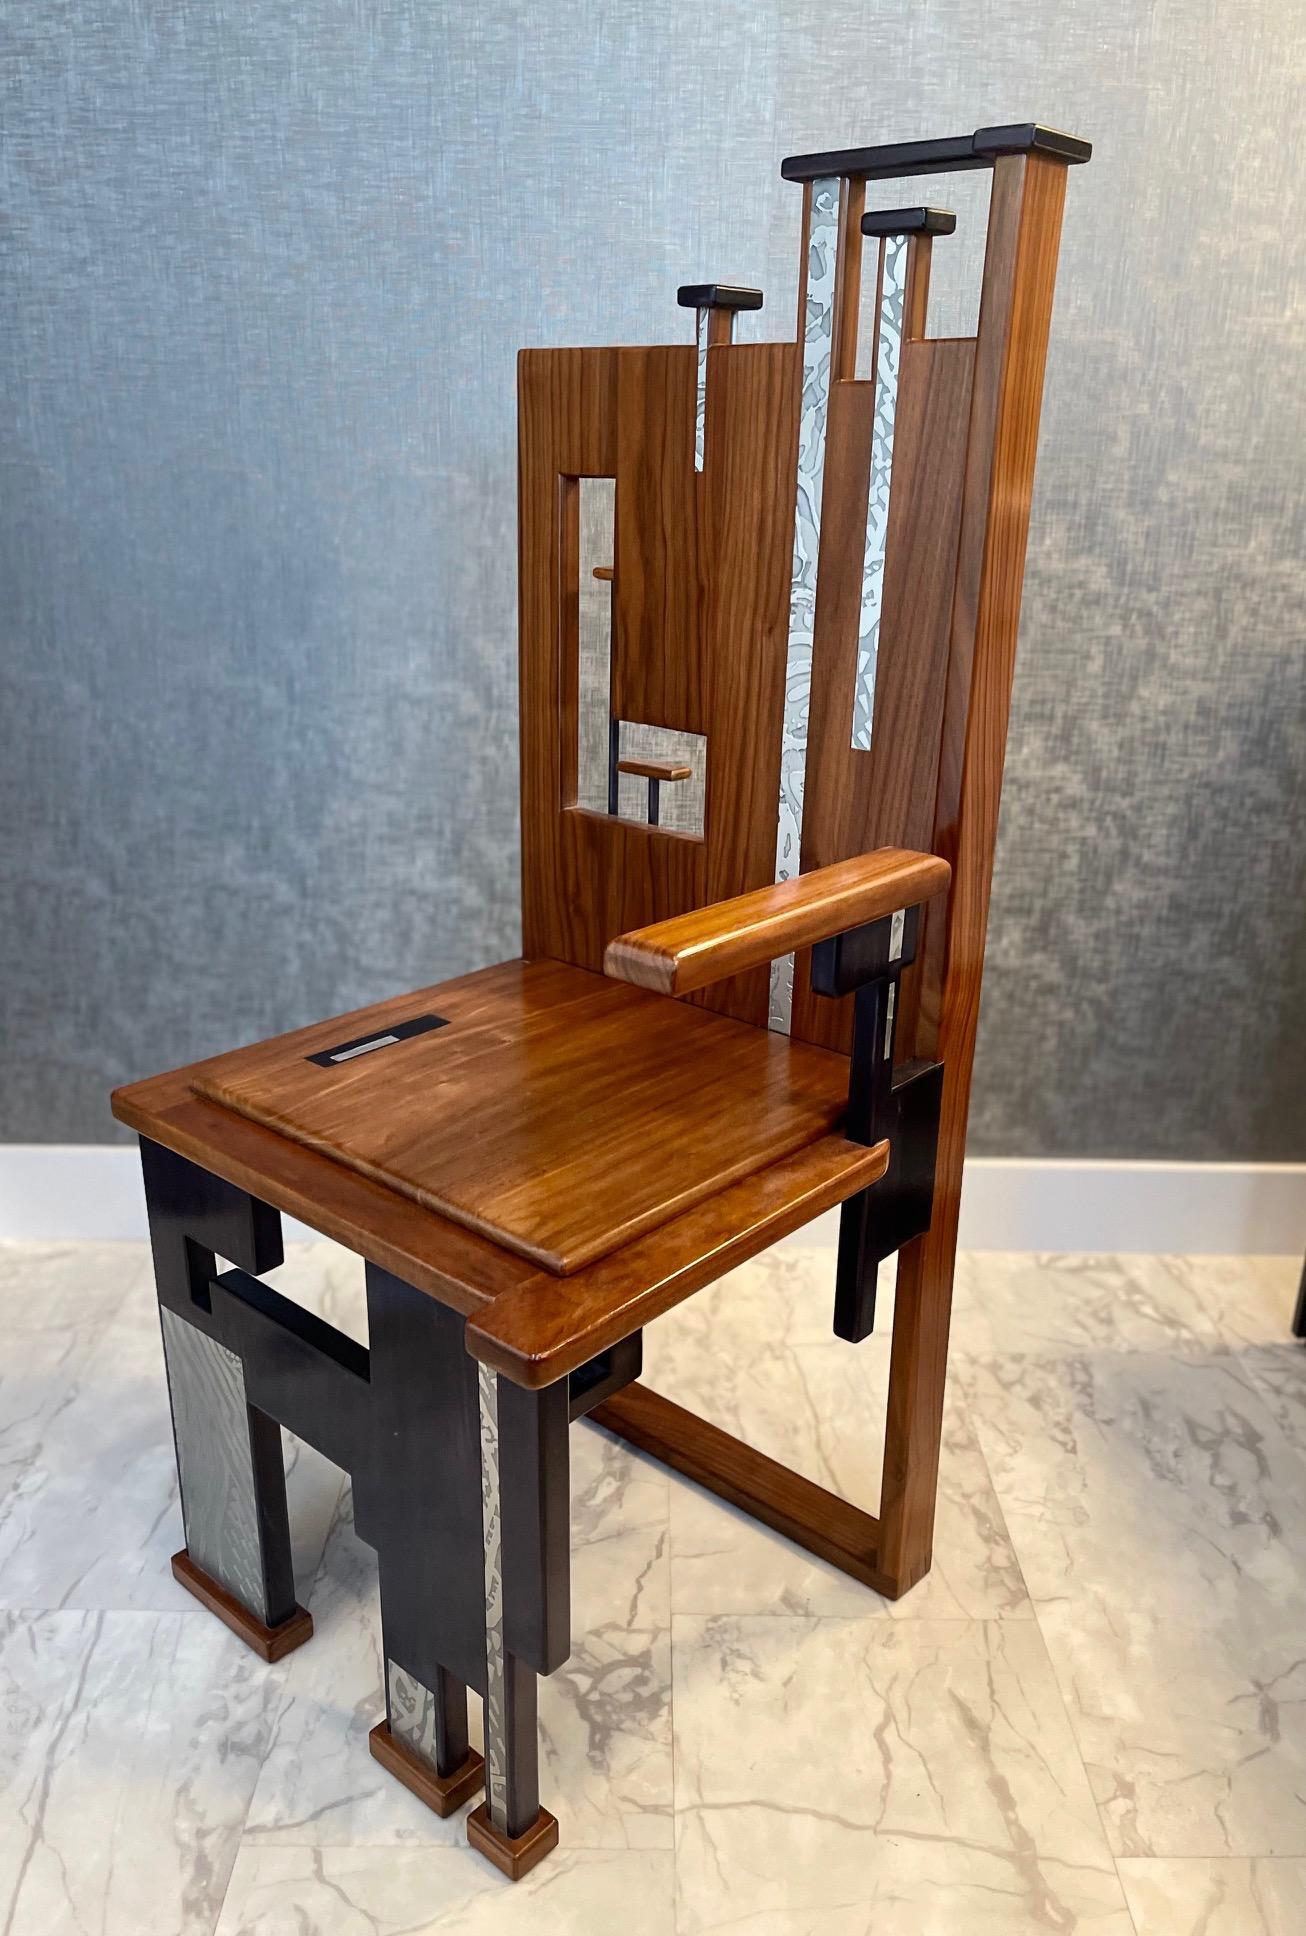 Contemporary Arts & Crafts chair from Washington DC Series, circa 1995, made of American walnut, dyed sycamore, and acid etched aluminum by Jacob Rogers Art (Joe Jacob and Evy Rogers).
 